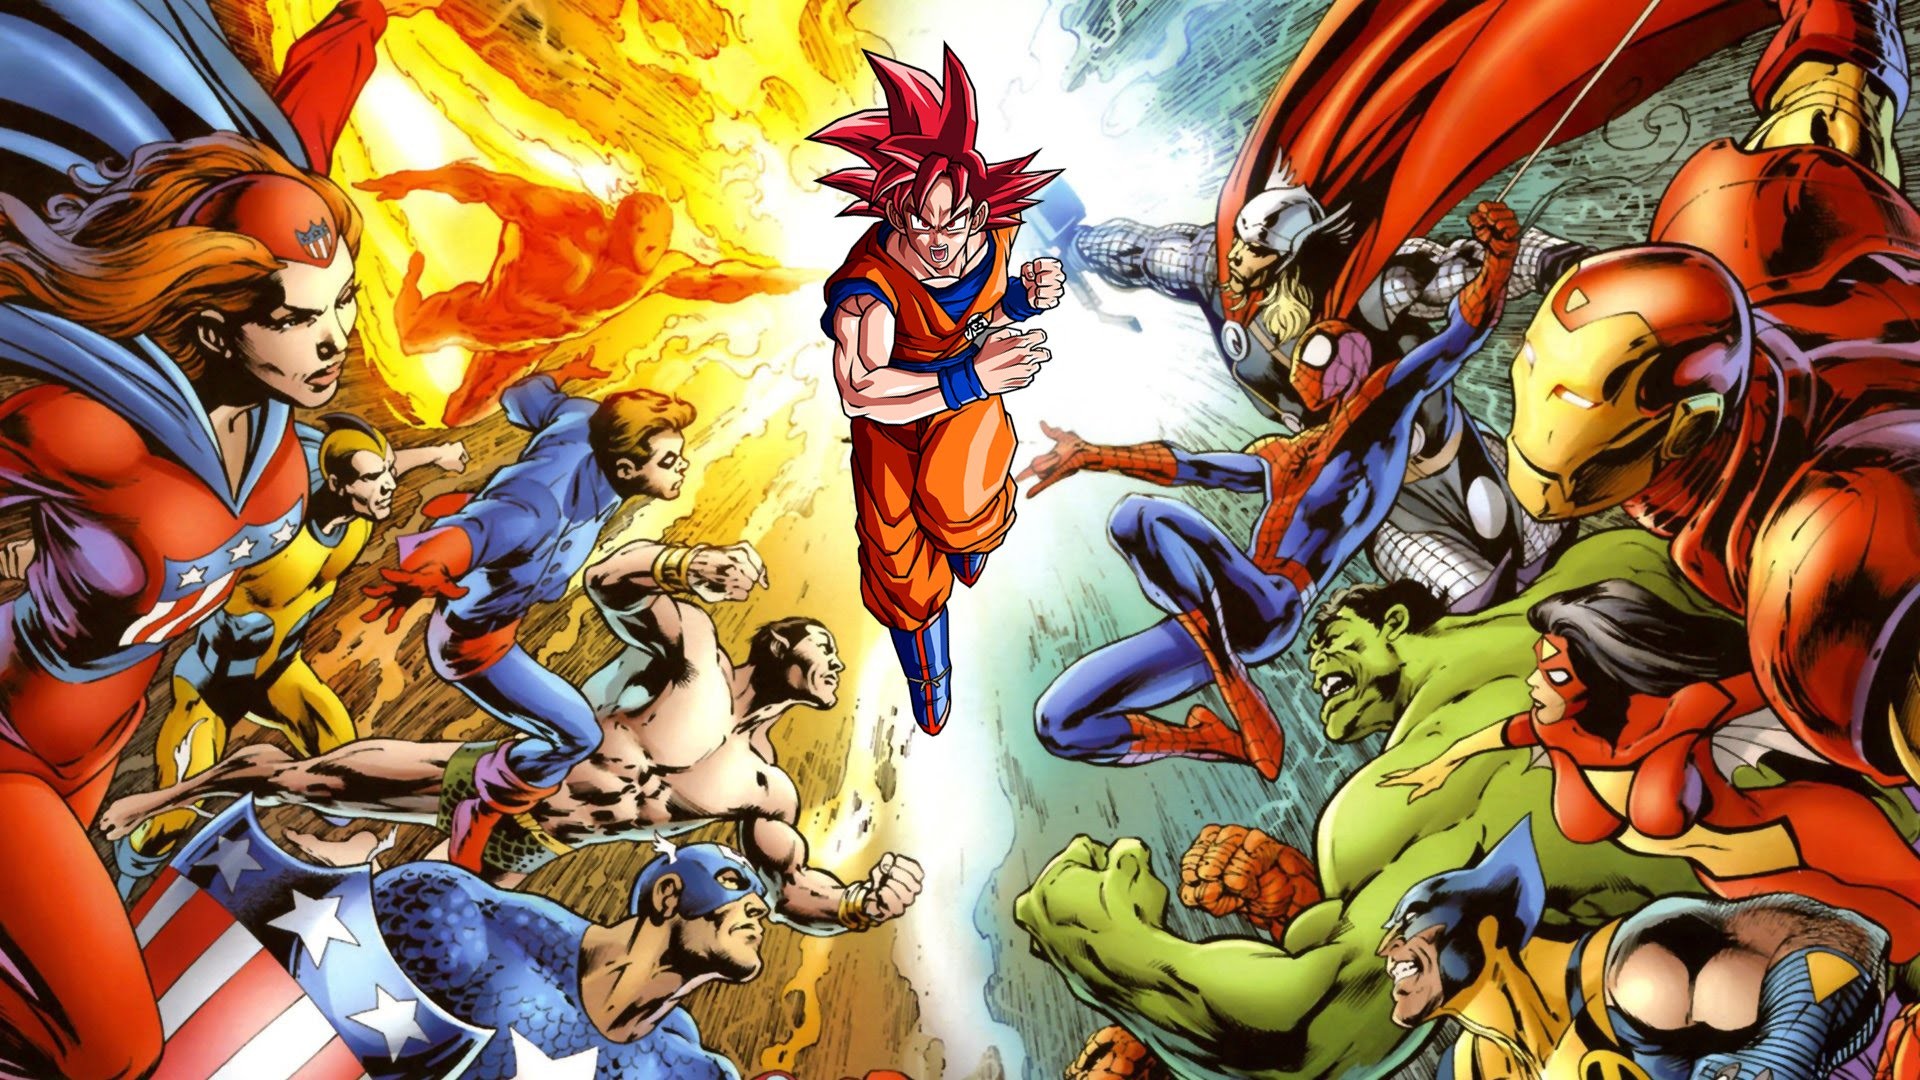 1920x1080 Rate Your Characters Top 88 - DC Comics and Marvel Super Heroes and Dragon  Ball Z / GT (DBZ) = Anime - YouTube